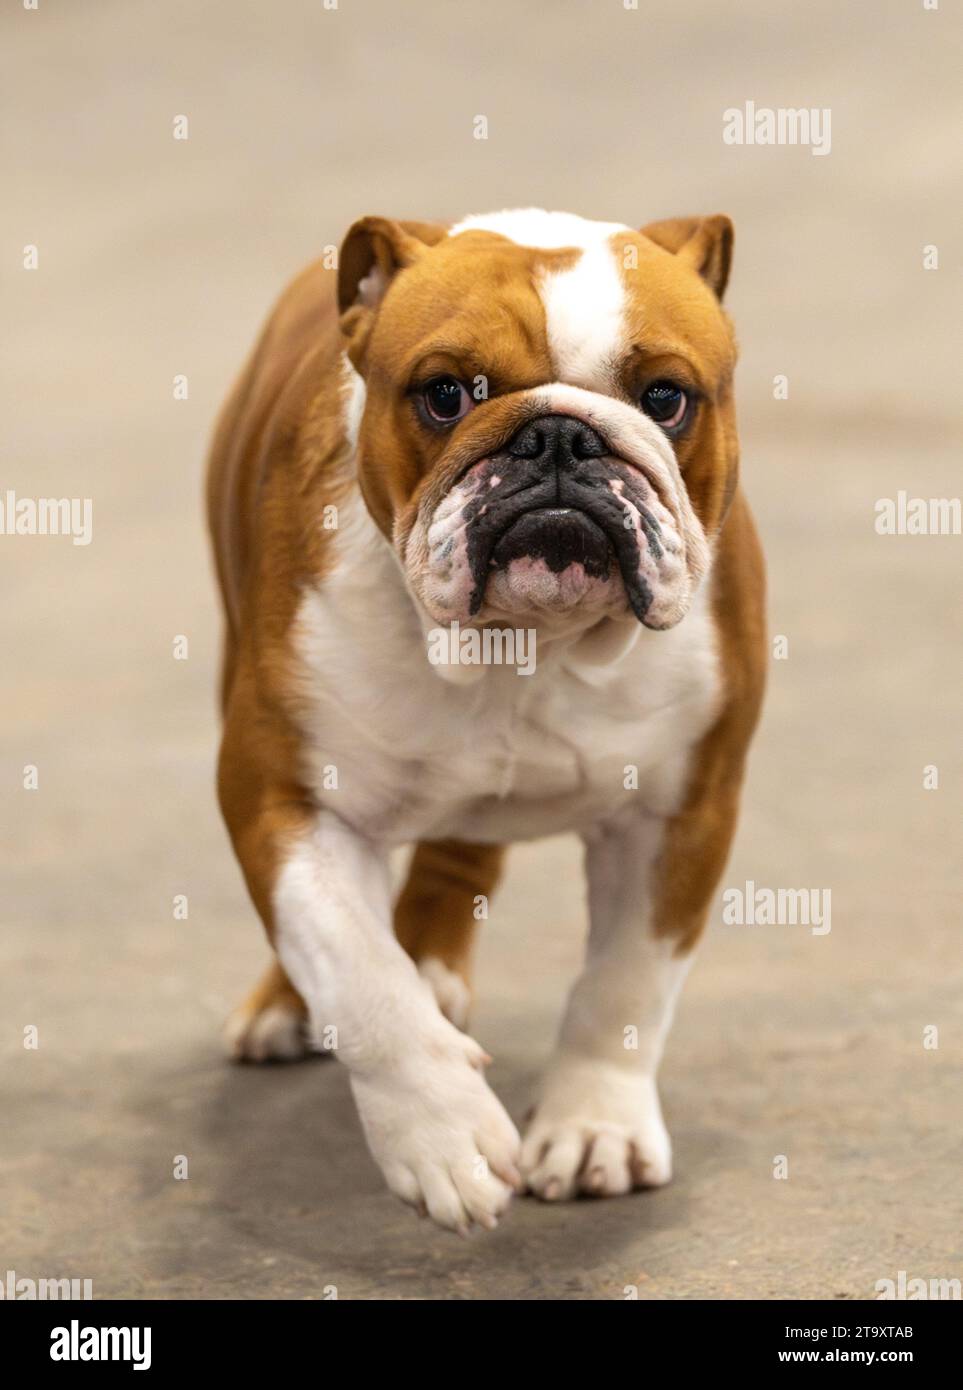 Red and white bulldog walking and looking grumpy Stock Photo